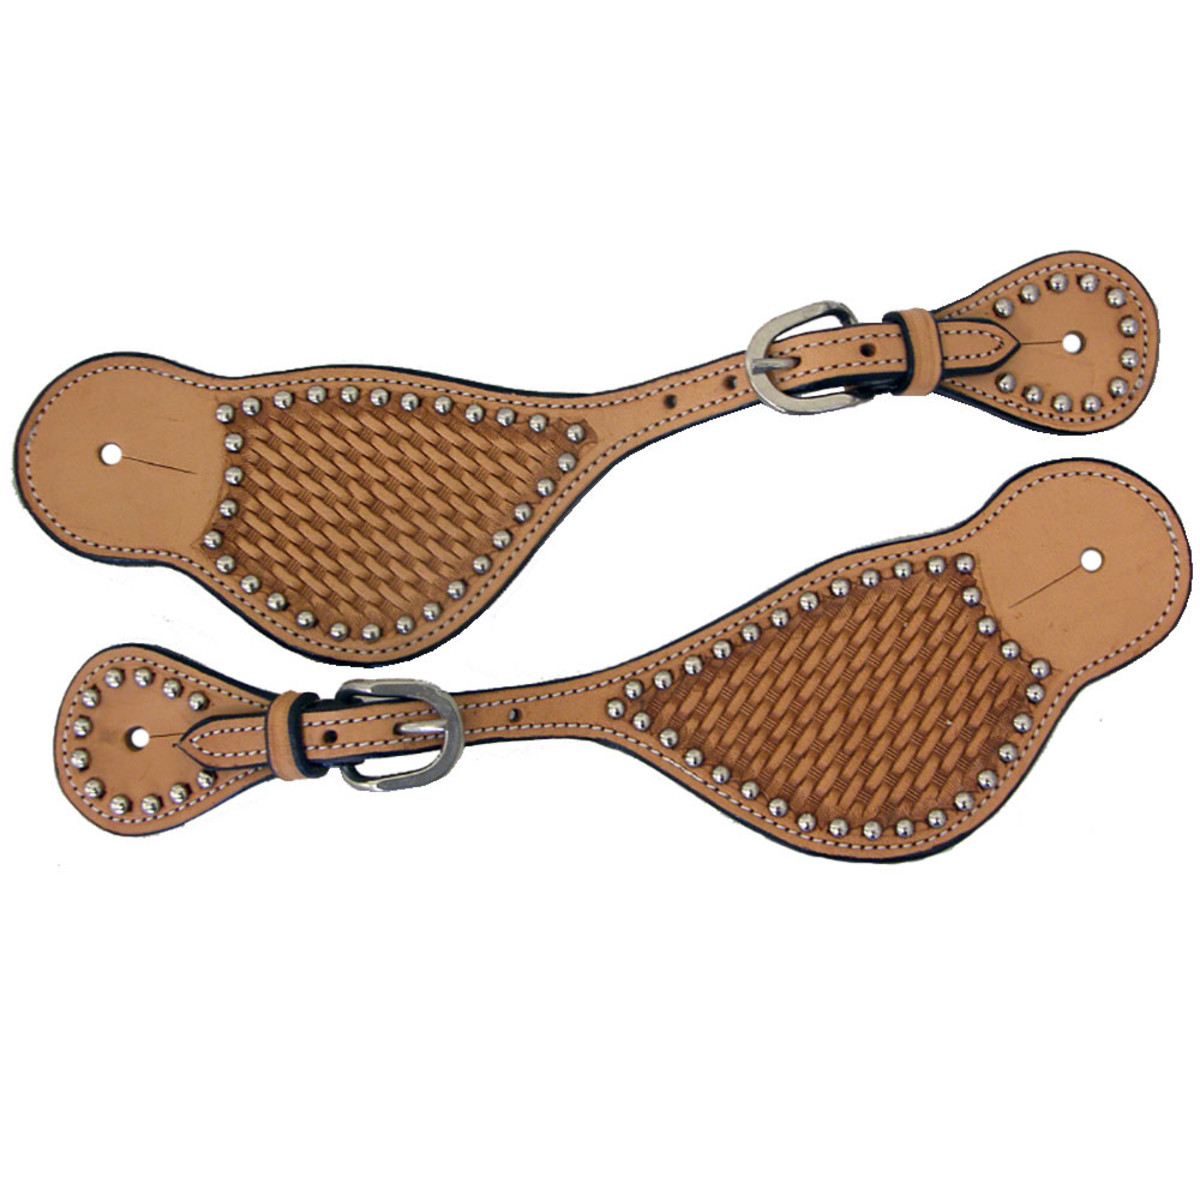 Shaped Leather Basketweave Tooled Western Spur Straps Silver Studs Basket Weave Western Spur Straps Silver Dots Lt Oil